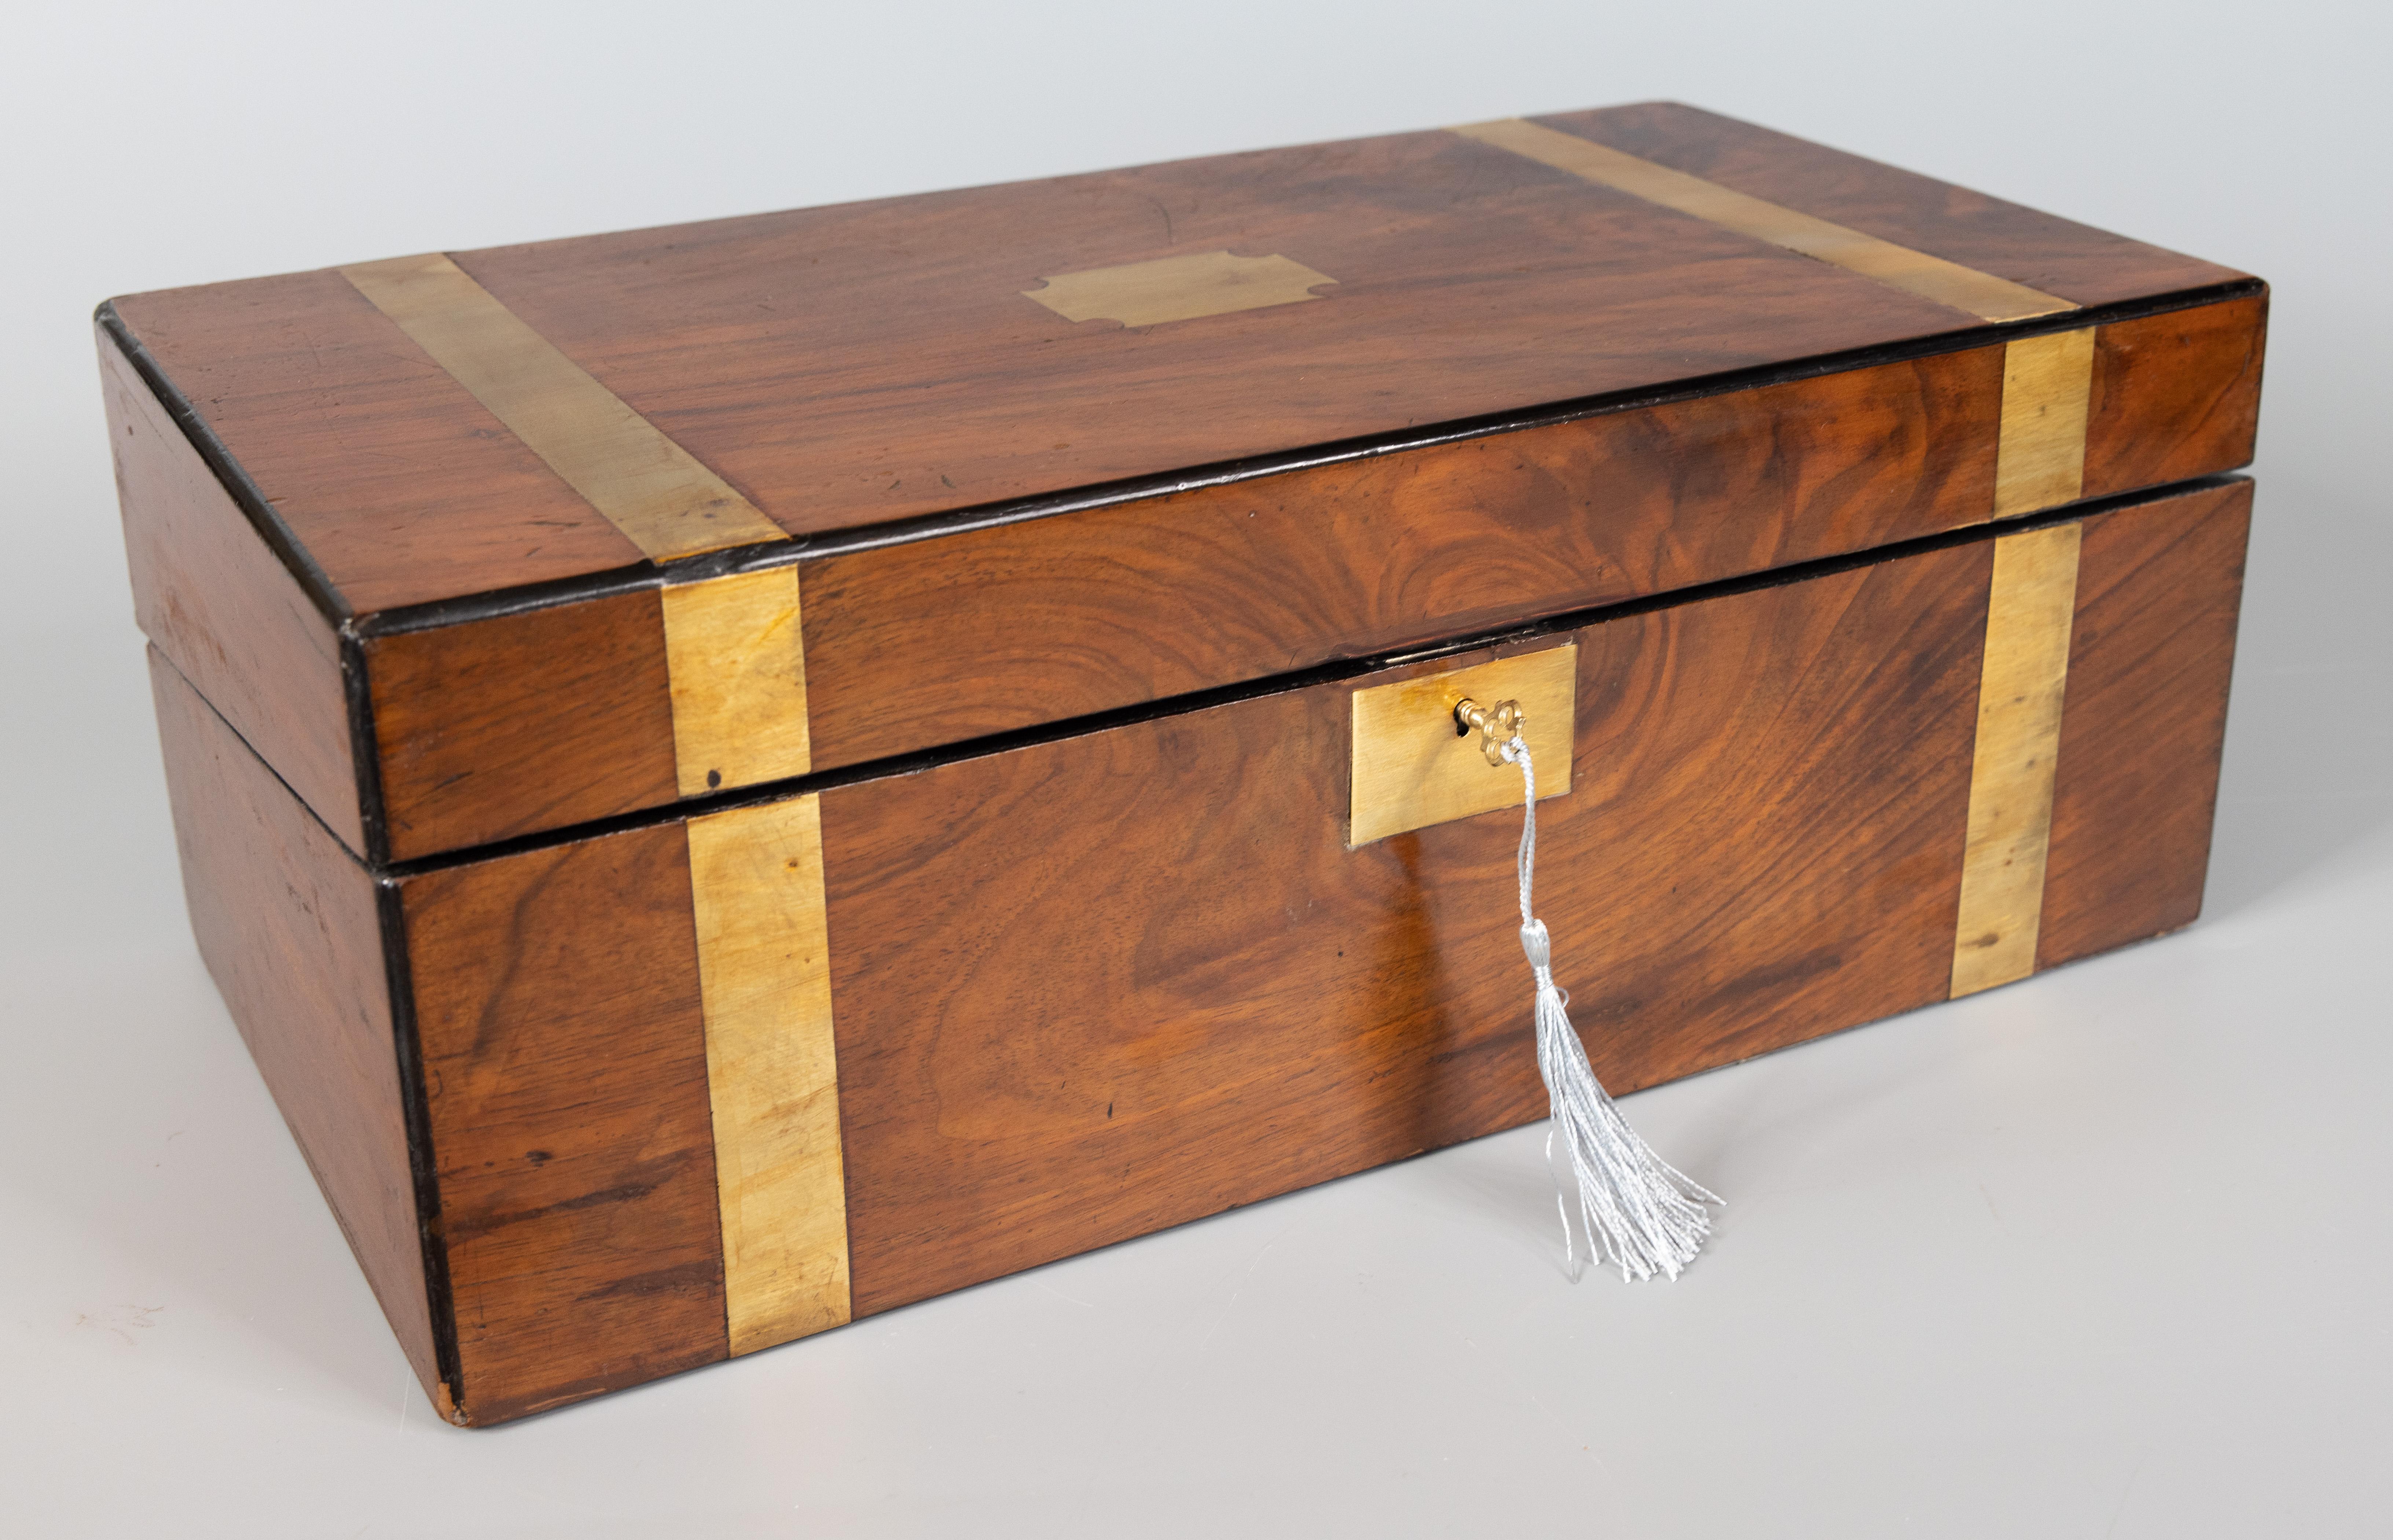 A very large antique English figured walnut campaign style box with lock and key, circa 1870. This fine hand crafted box has a richly figured walnut grain and is accented with brass bands, center and key plate. It is a nice large size at 18